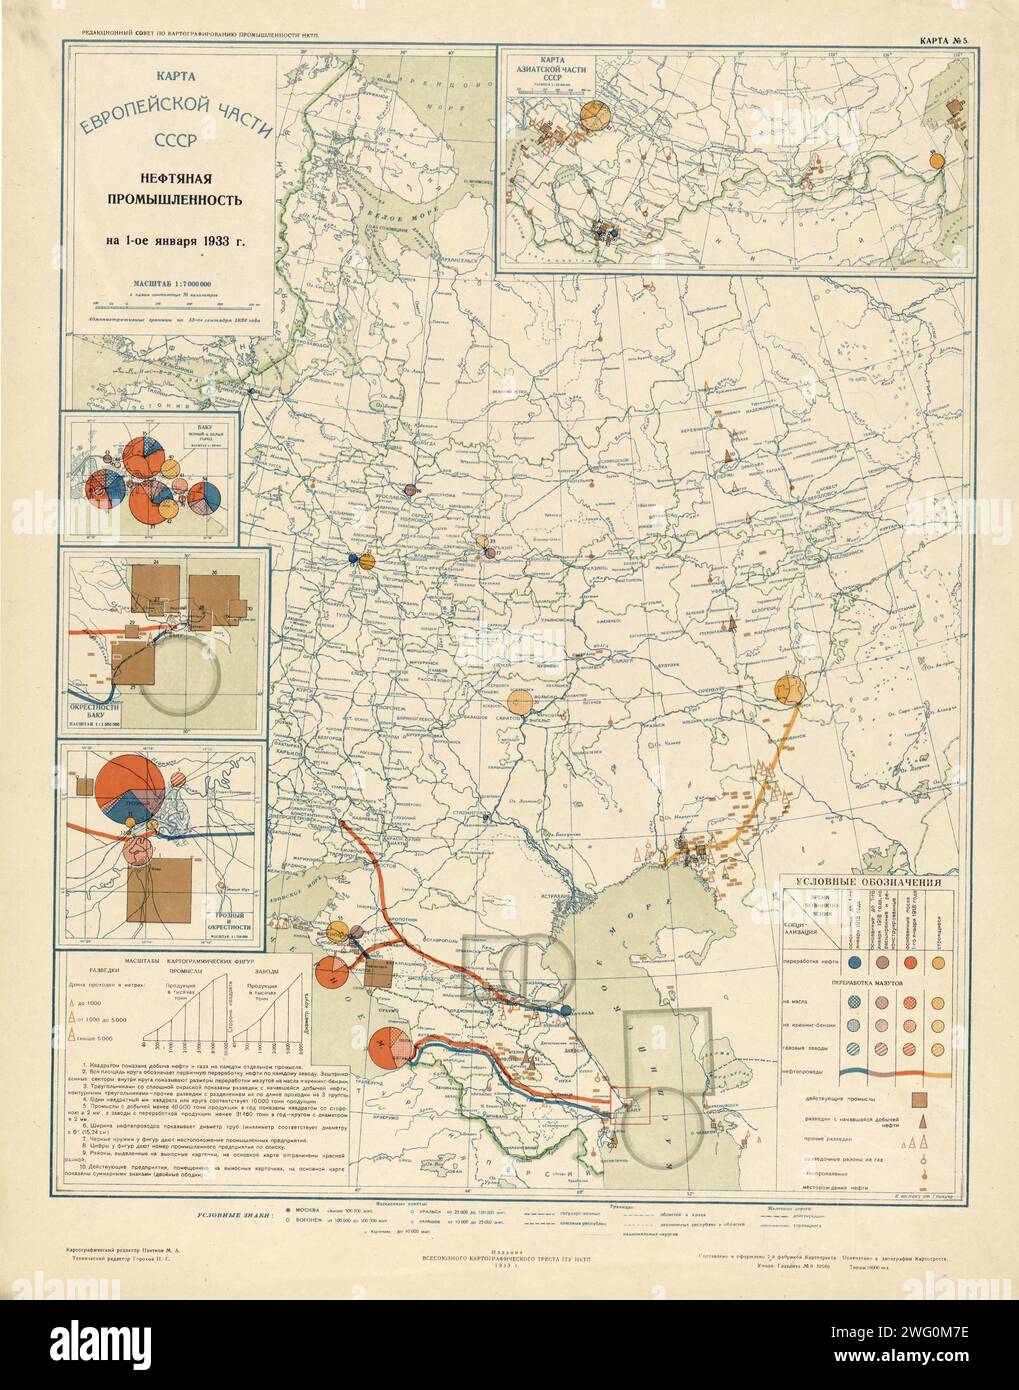 Oil industry on January 1, 1933, 1934. From the atlas &quot;Industry of the USSR at the beginning of the 2nd Five-Year Plan. Geographical atlas.&quot;Conventional signs: boundaries (5 types), settlements (5 groups), railways (operating, under construction); oil refining (4 types), fuel oil processing (12 types), oil pipelines (4 types), existing fields, exploration and exploration areas (5 types), gas shows, oil fields; numbers indicate the numbers of industrial enterprises in the list (Appendix: List of industrial enterprises to the Atlas. M., 1934). Stock Photo